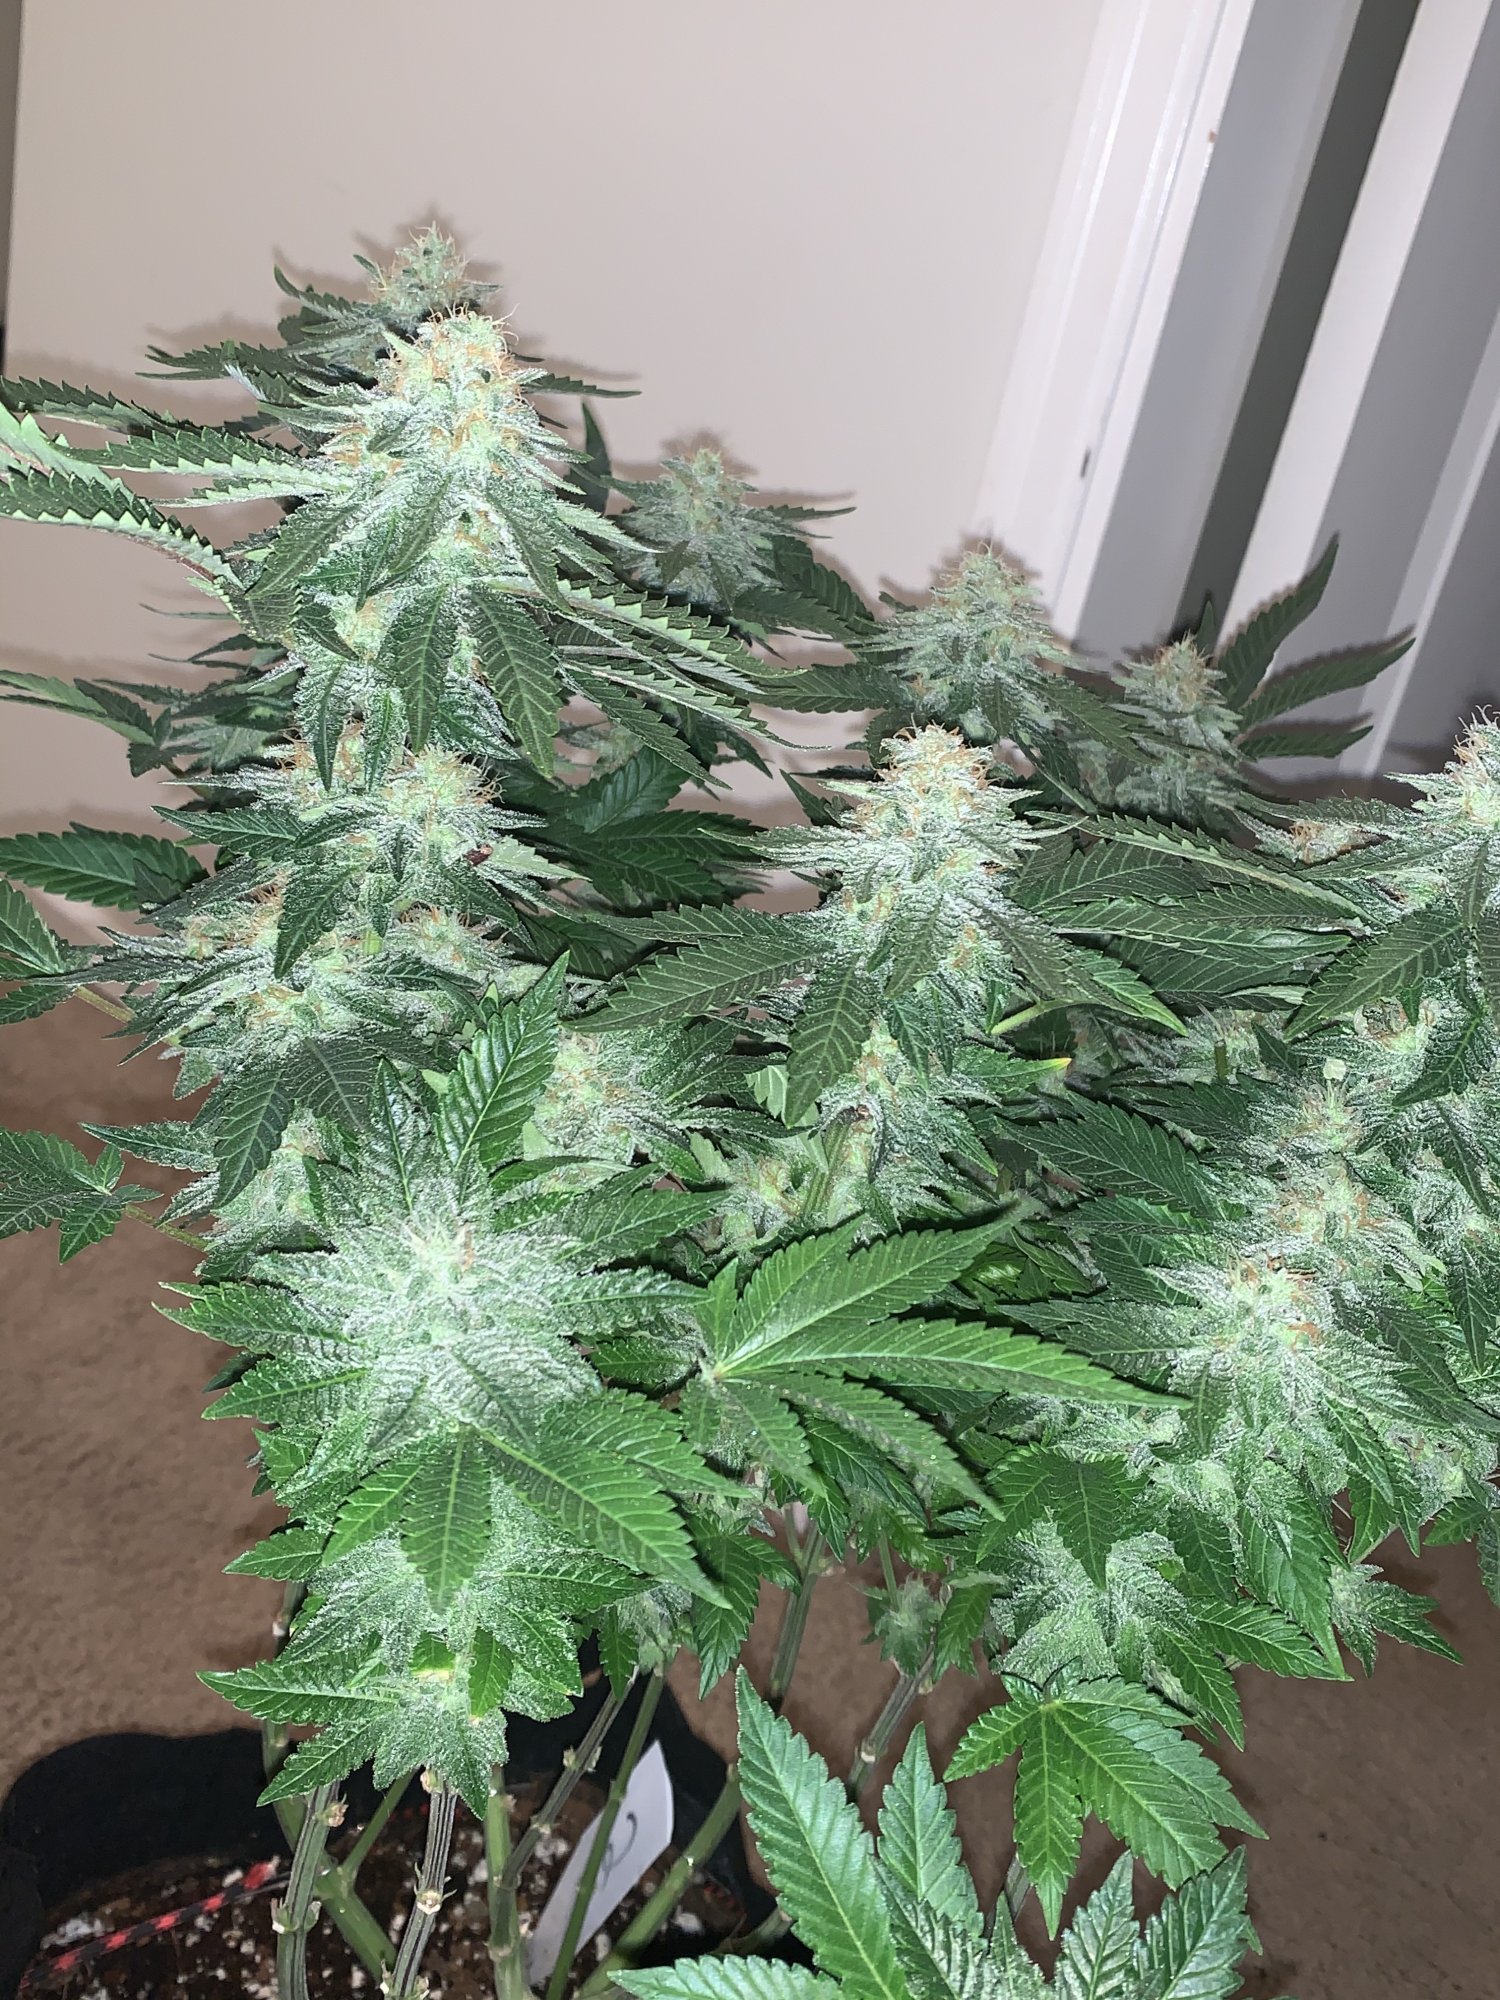 Tacos nearing end of flower 4